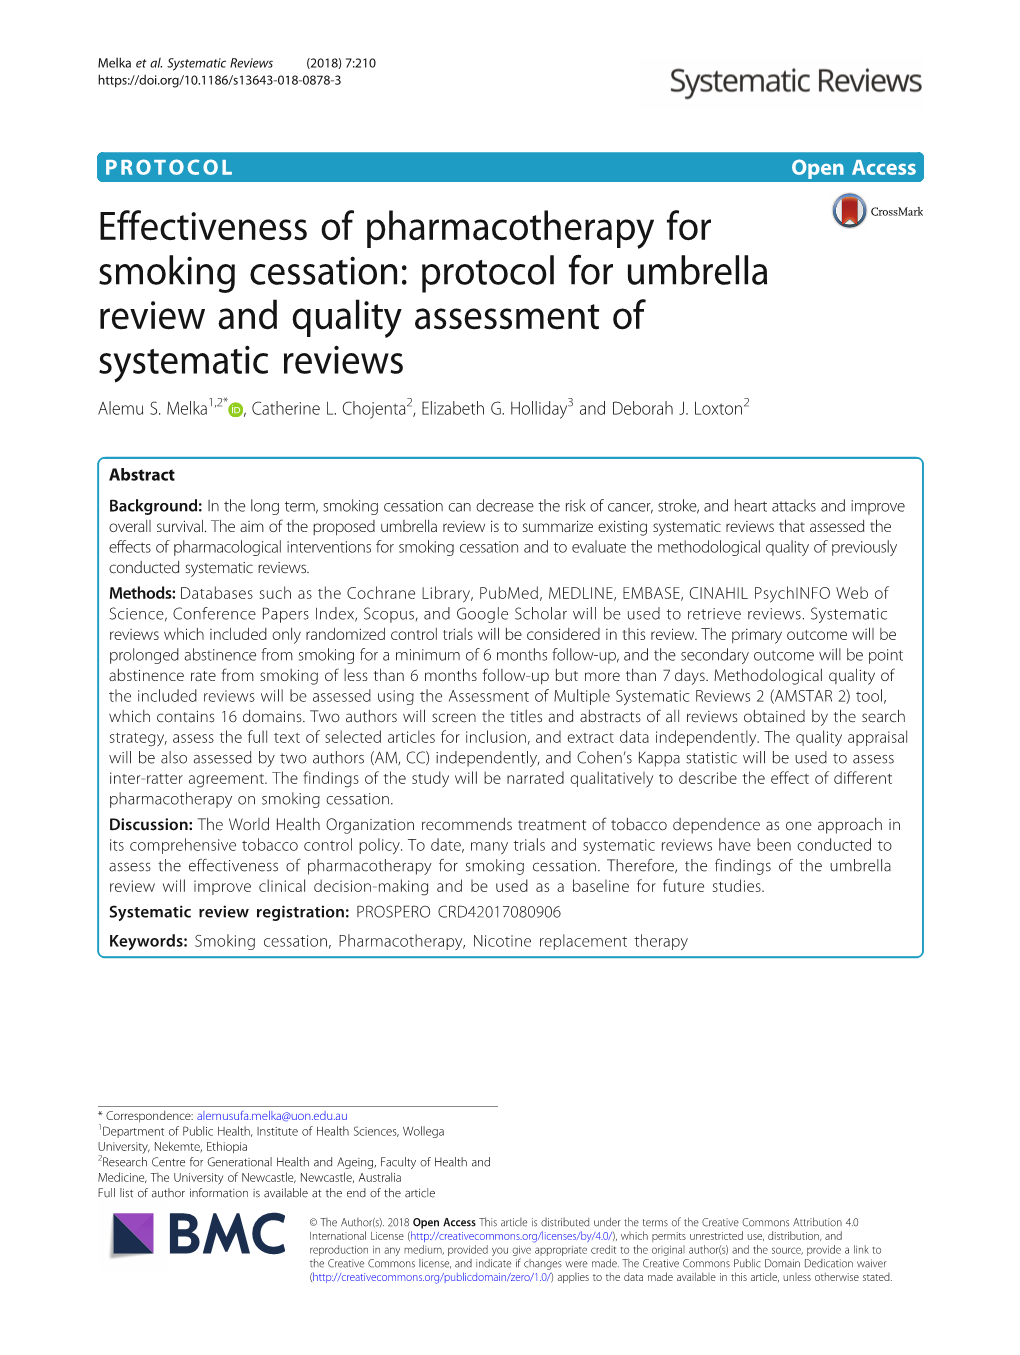 Effectiveness of Pharmacotherapy for Smoking Cessation: Protocol for Umbrella Review and Quality Assessment of Systematic Reviews Alemu S